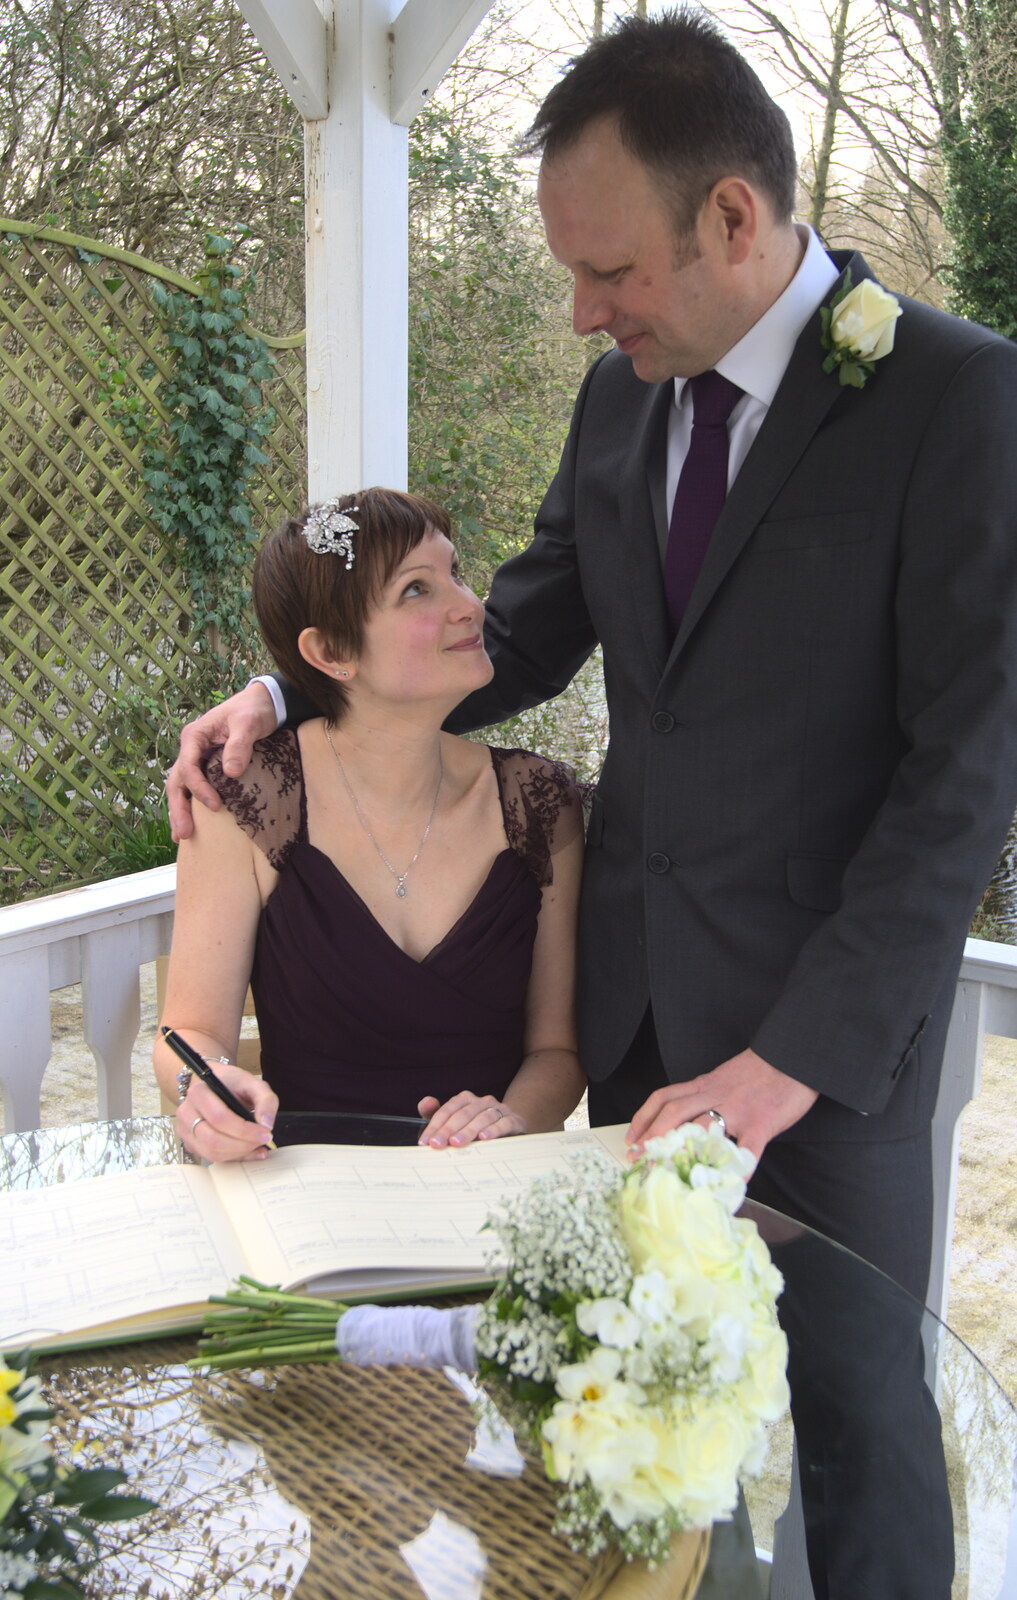 The signing of the register from John and Caroline's Wedding, Sheene Mill, Melbourne, Cambridgeshire - 8th March 2014